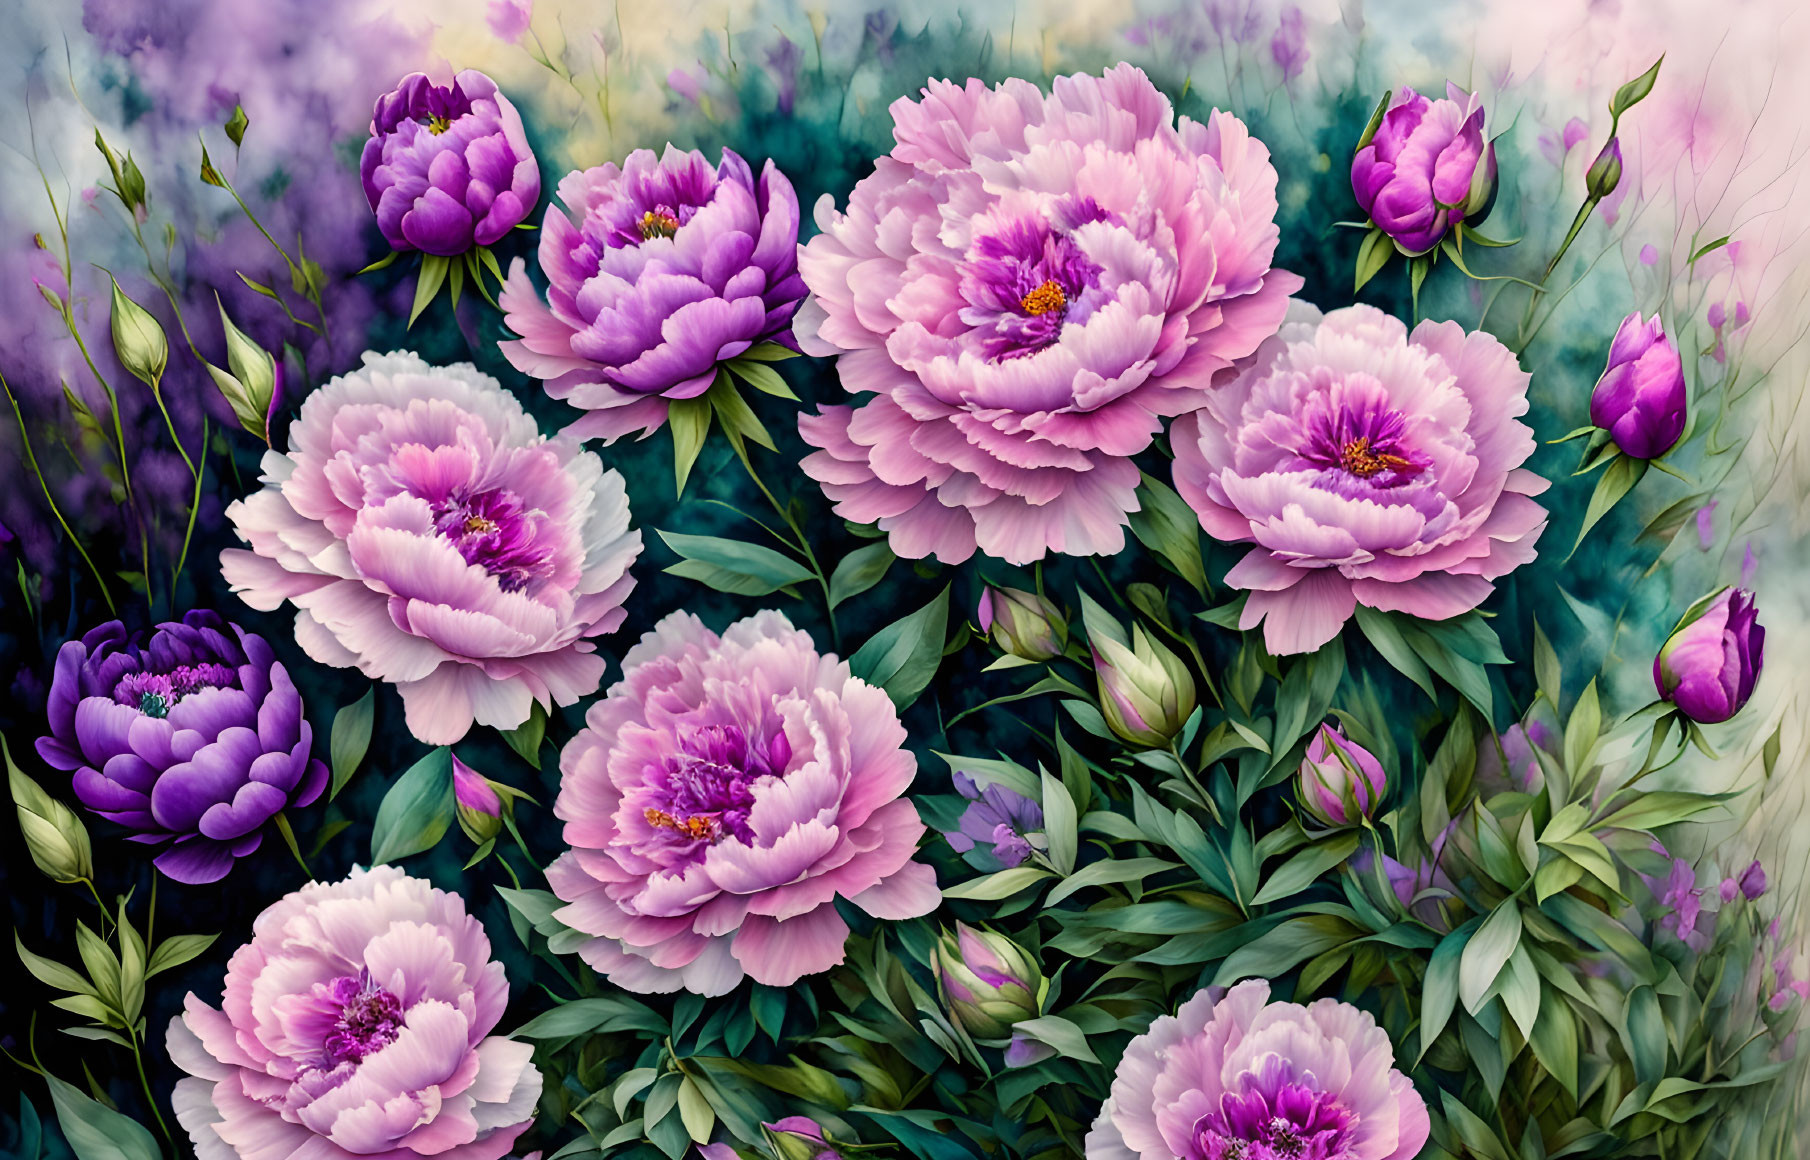 Colorful Peonies in Full Bloom with Pink and Purple Petals on Soft Background